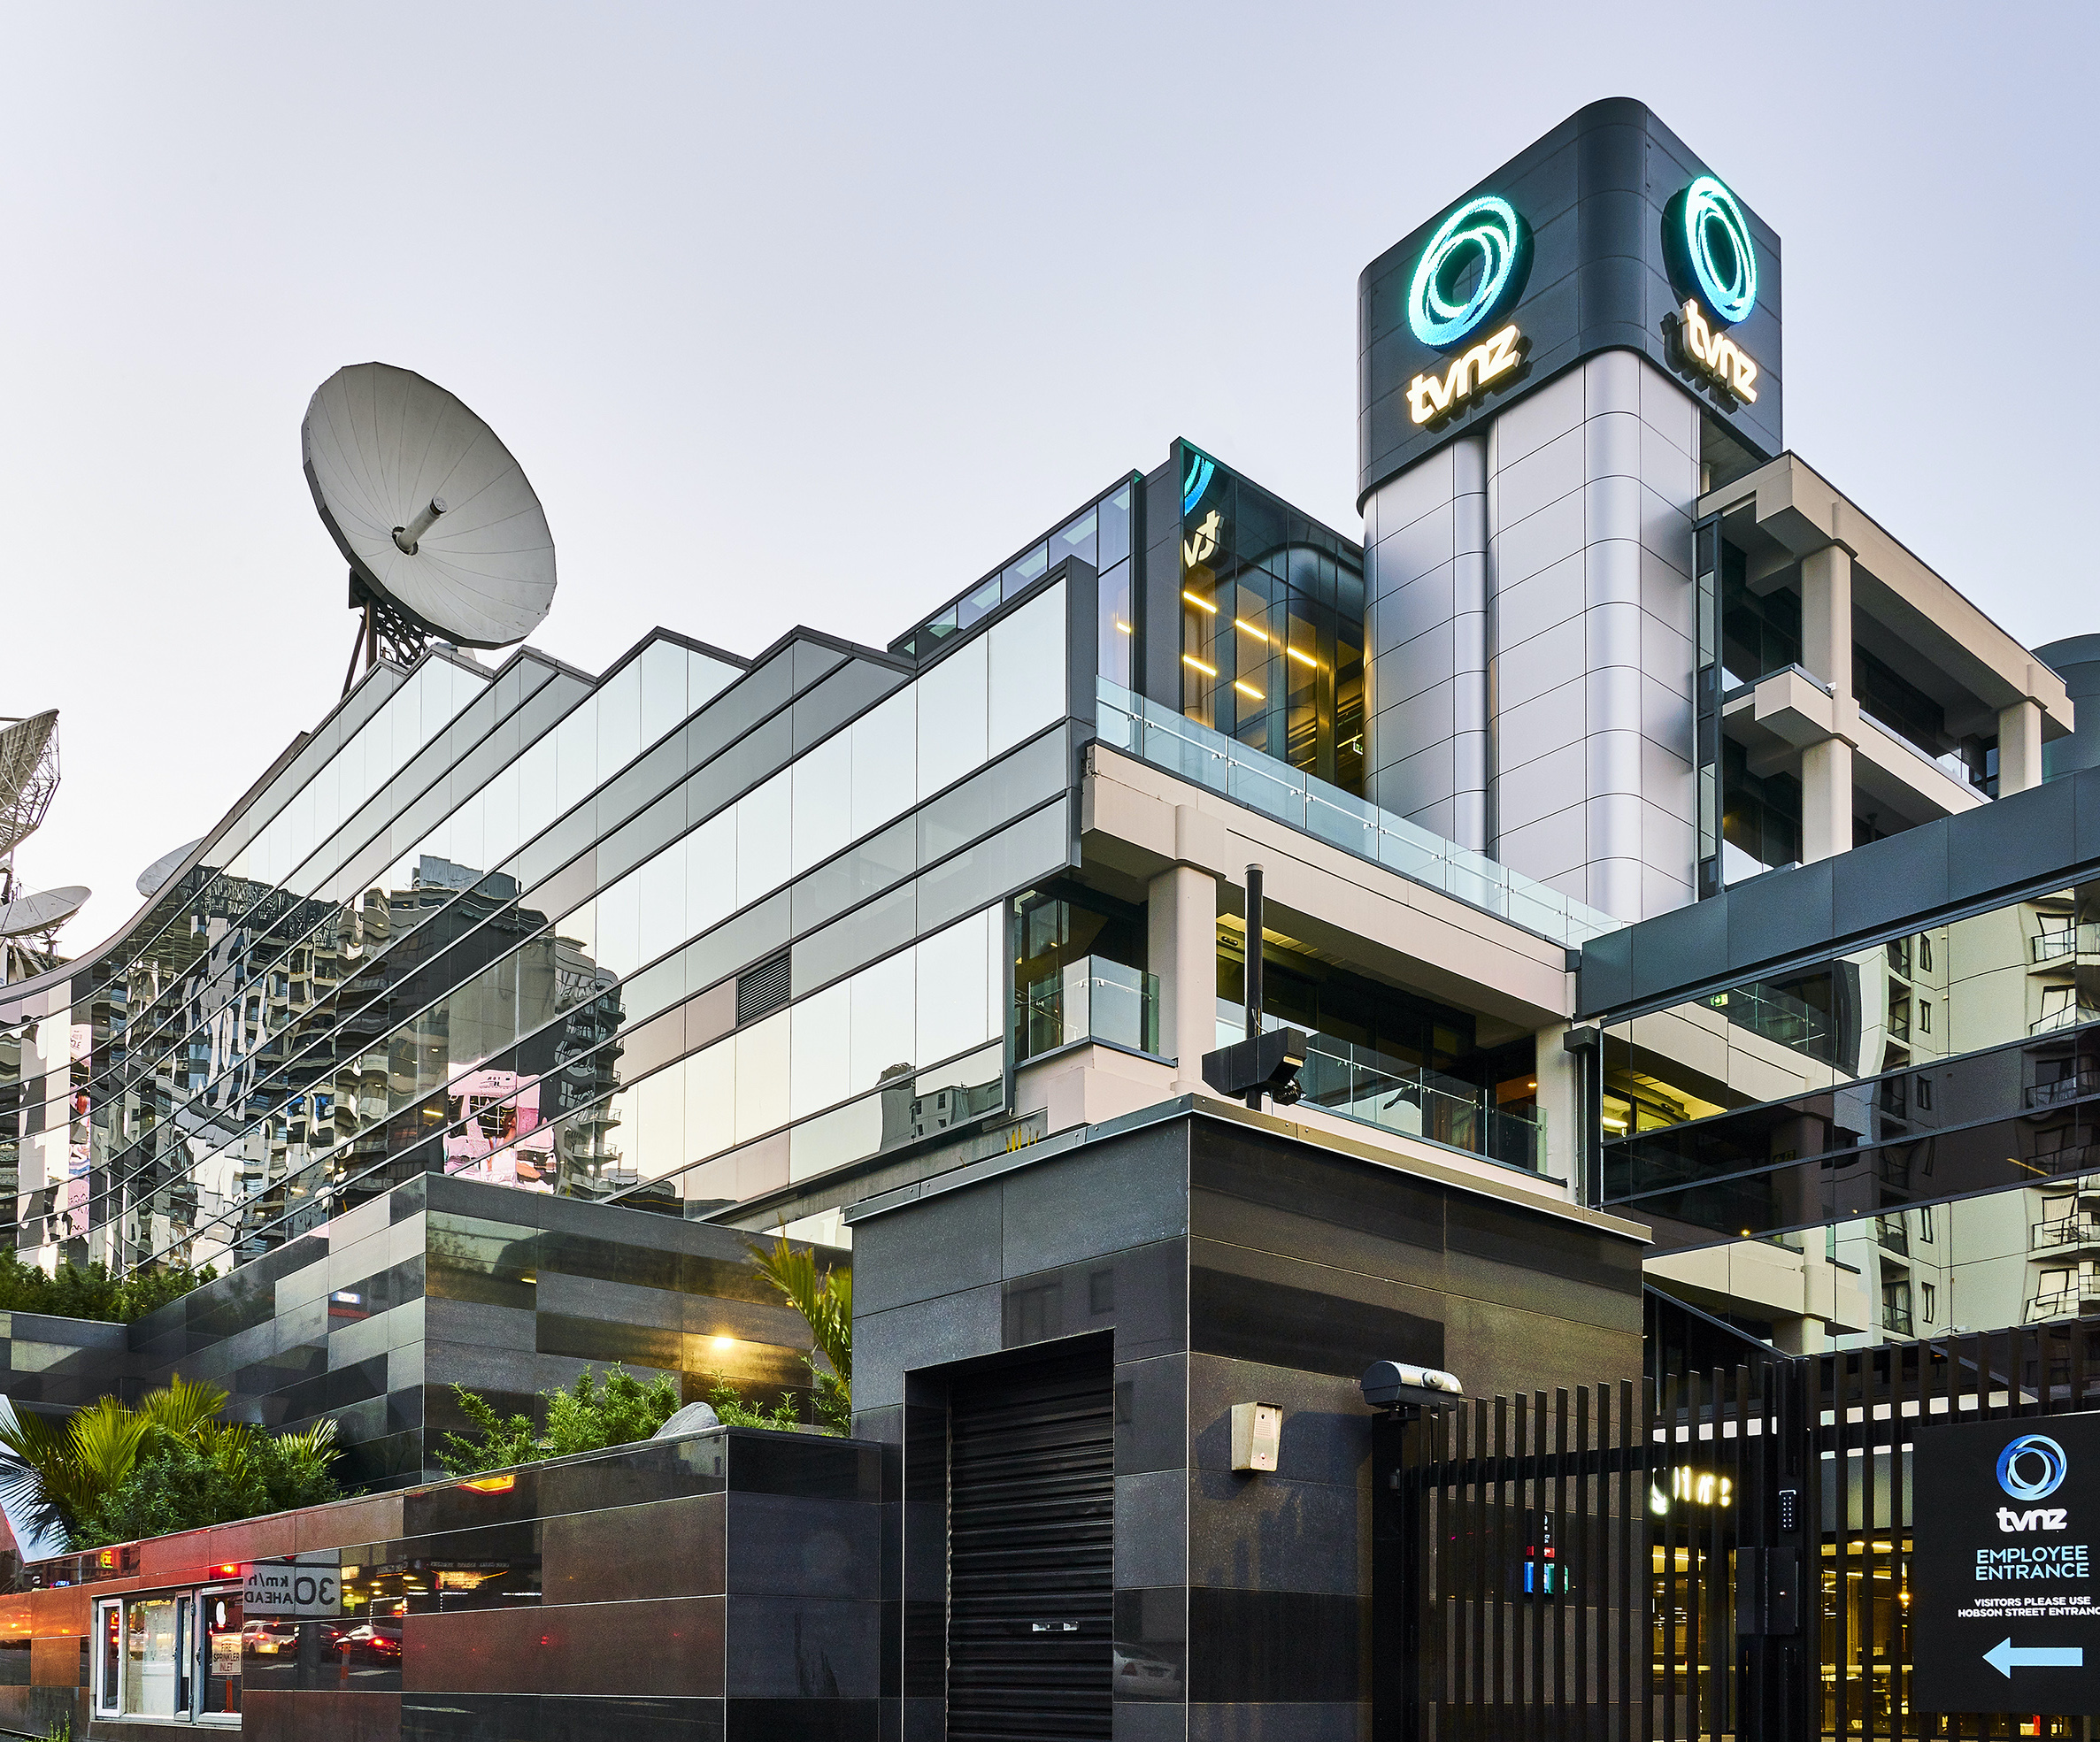 How TVNZ Scaled Their OnDemand Service to Reach 2.5M Kiwis